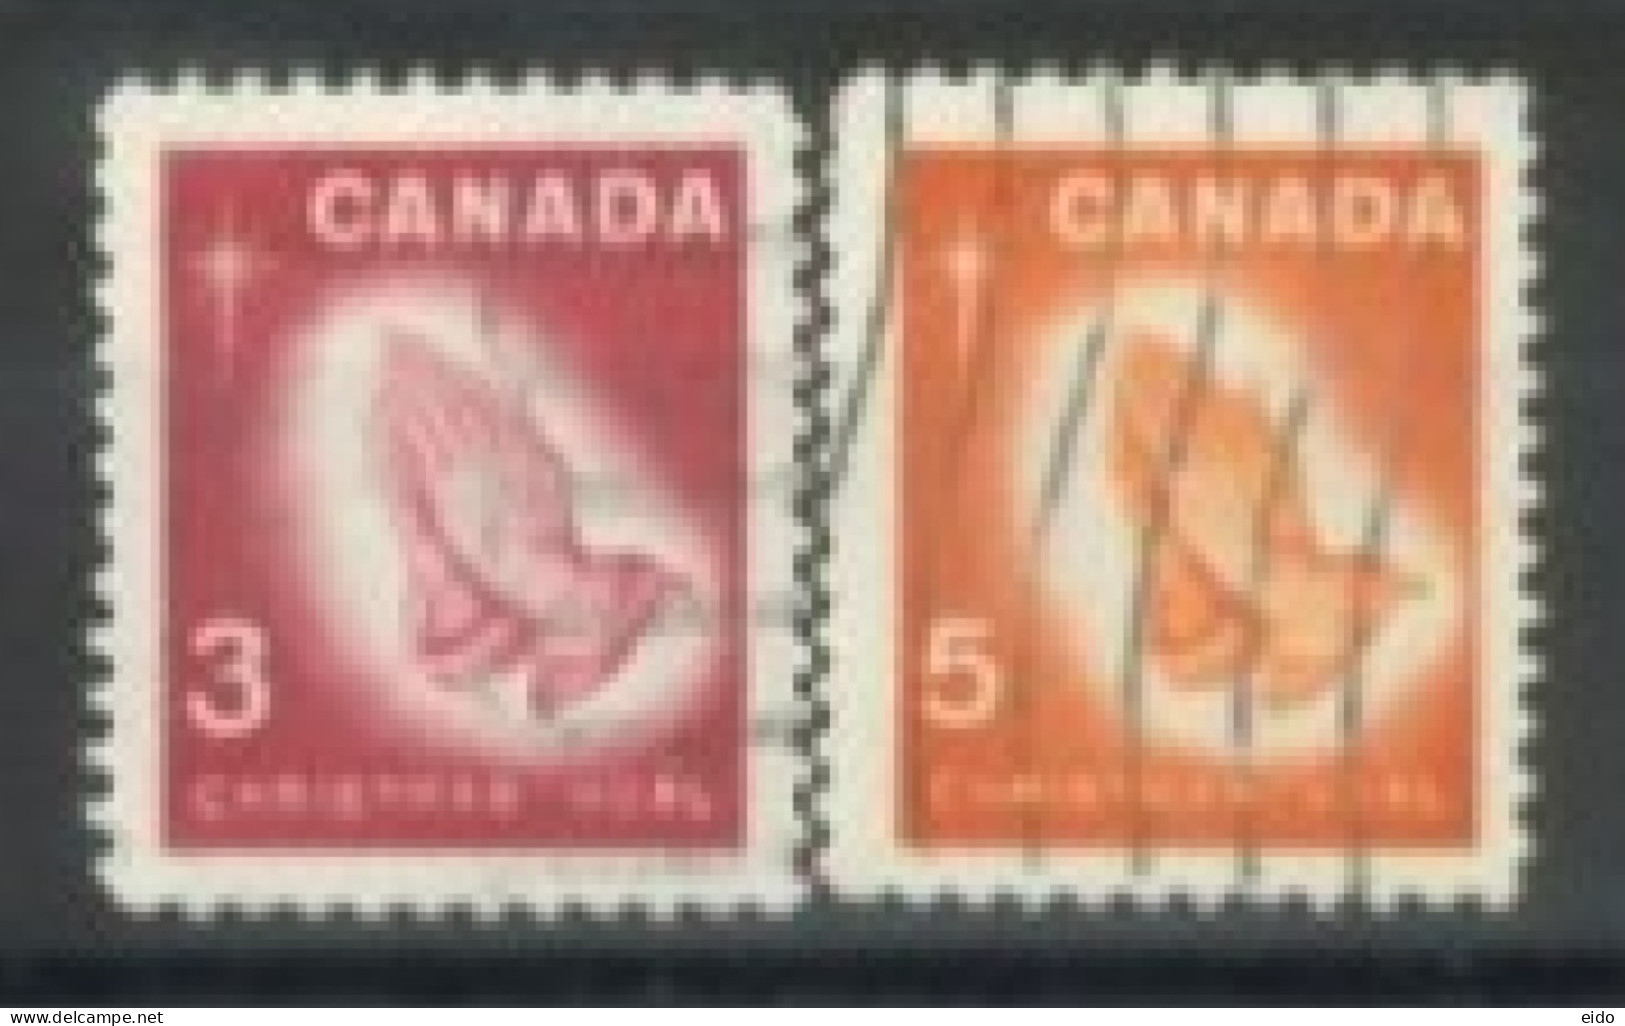 CANADA - 1966, CHRISTMAS STAMPS COMPLETE SET OF 2, USED. - Gebraucht